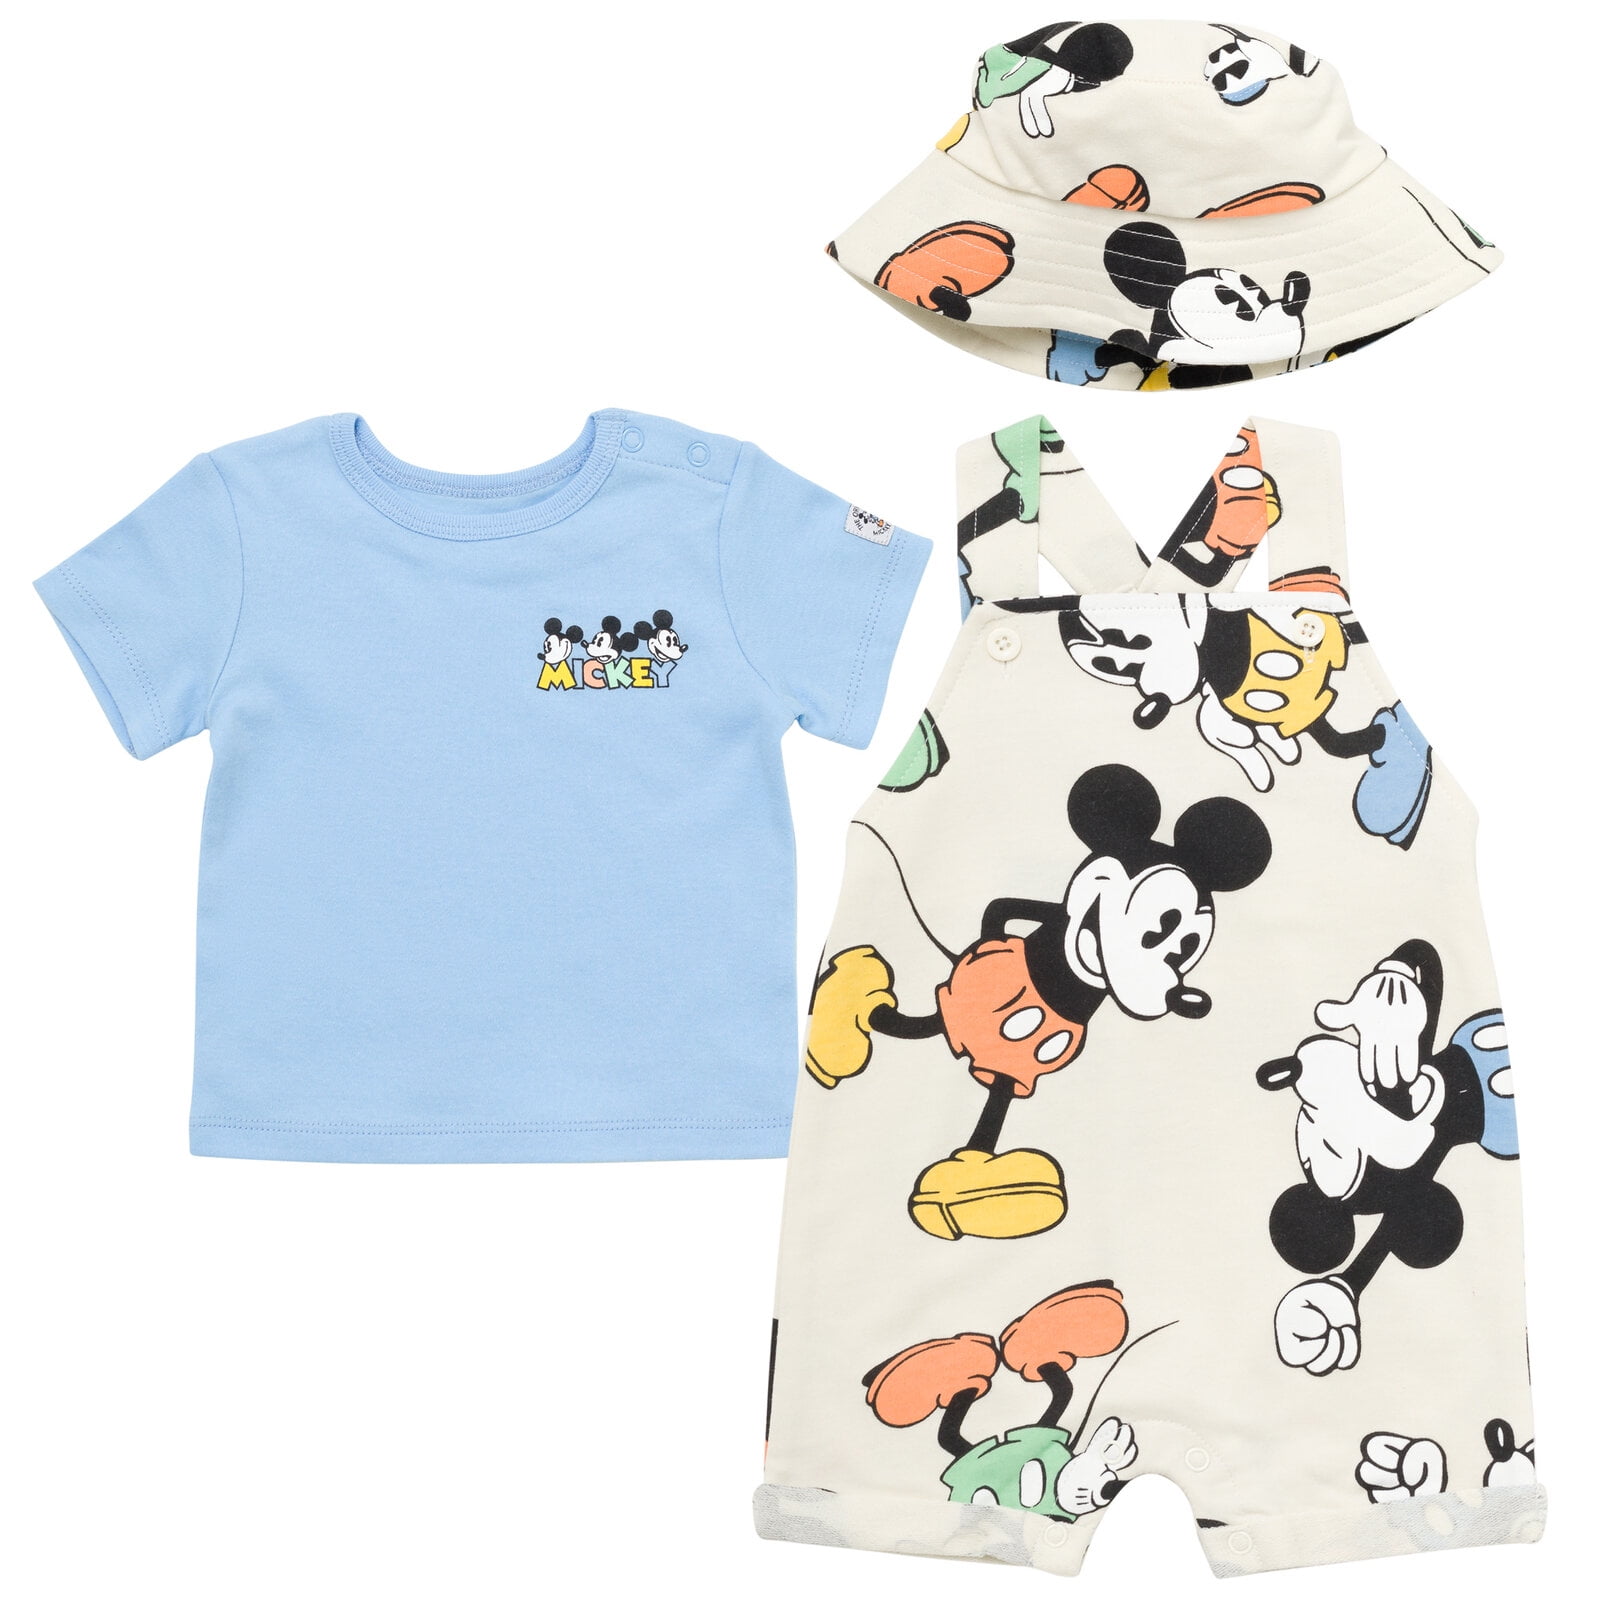 The Disney 100 x H&M kids collection is the cutest thing you'll